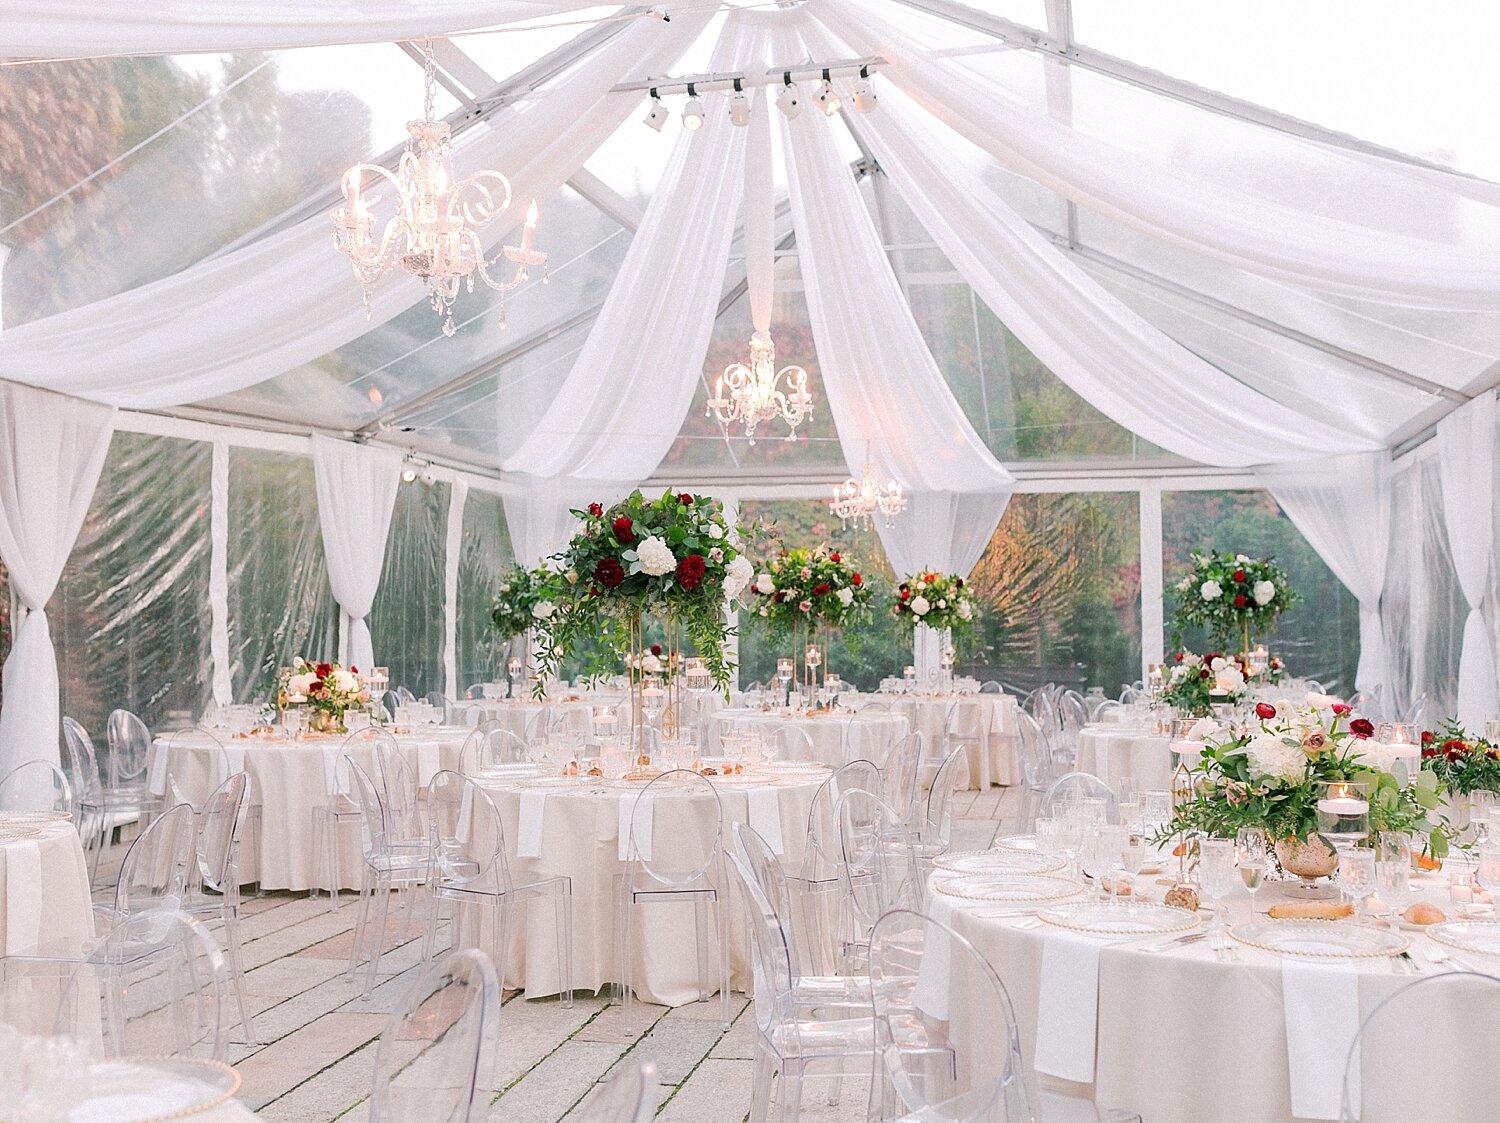 wedding reception under clear tent photographed by Asher Gardner Photography